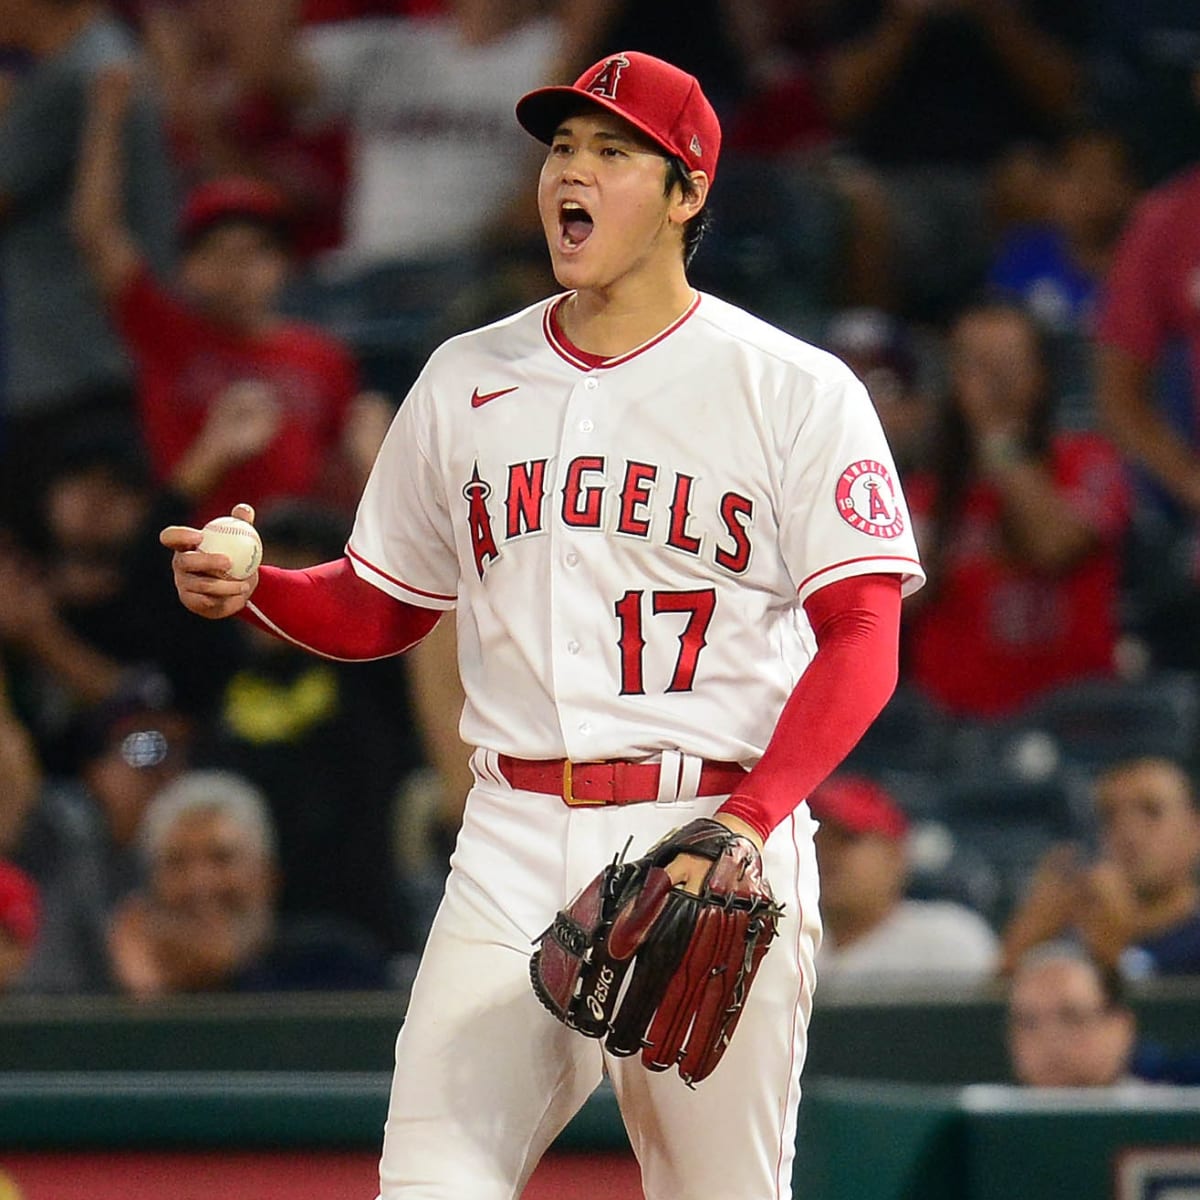 IN PHOTOS: Highlights of Shohei Ohtani's MLB rookie year